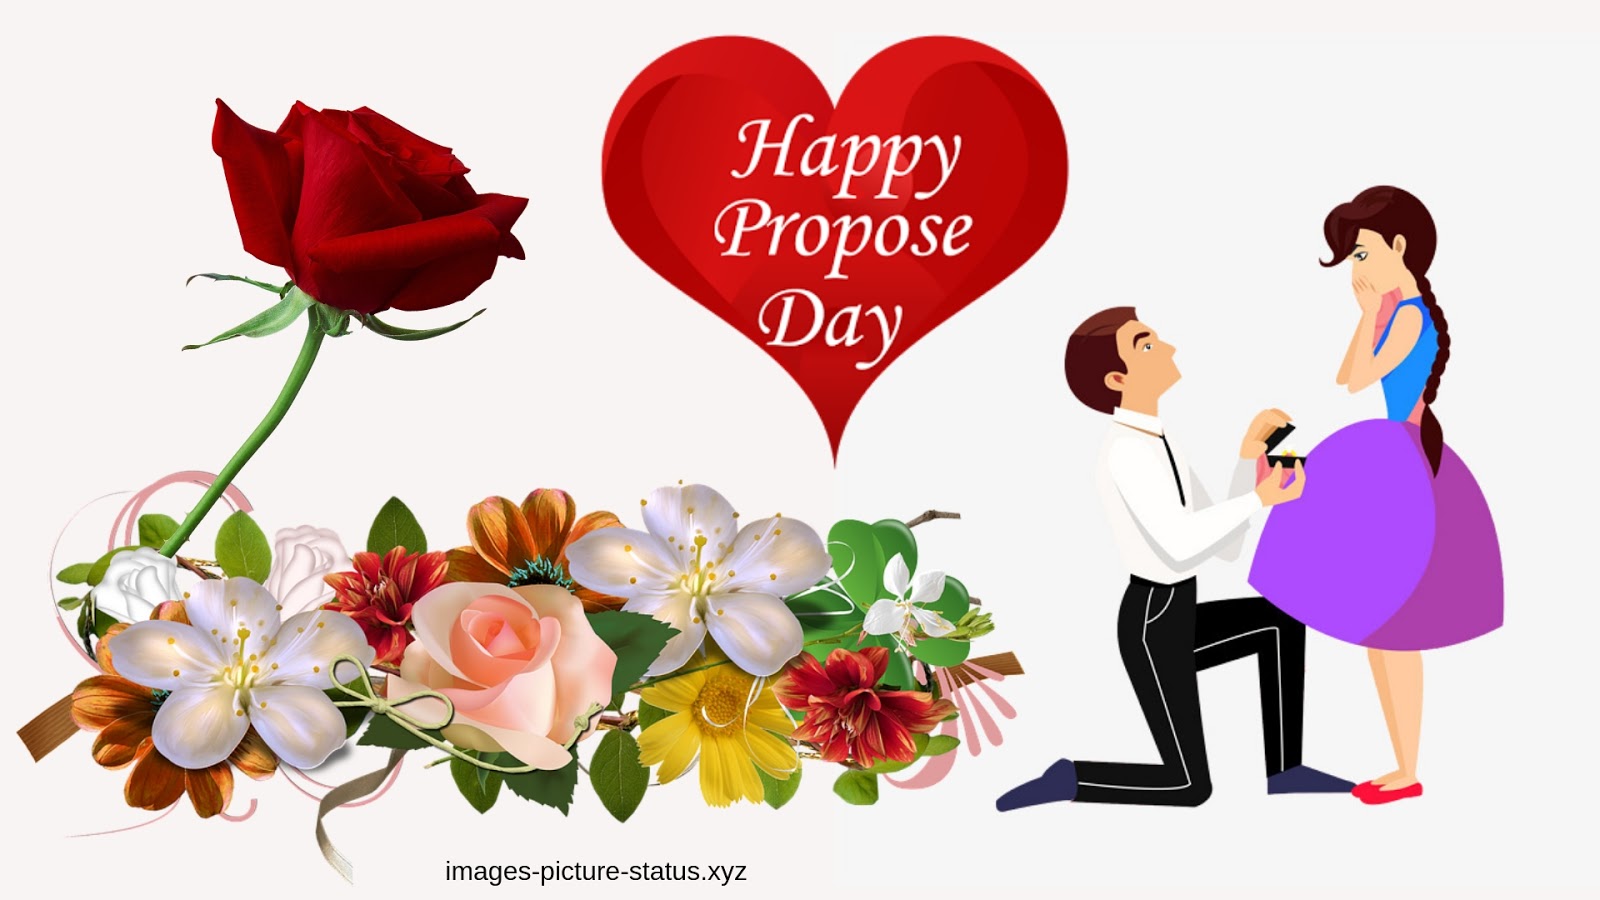 Happy Promise Day Wishes Special Images Picture For - Man In Love Cartoon -  1600x900 Wallpaper 